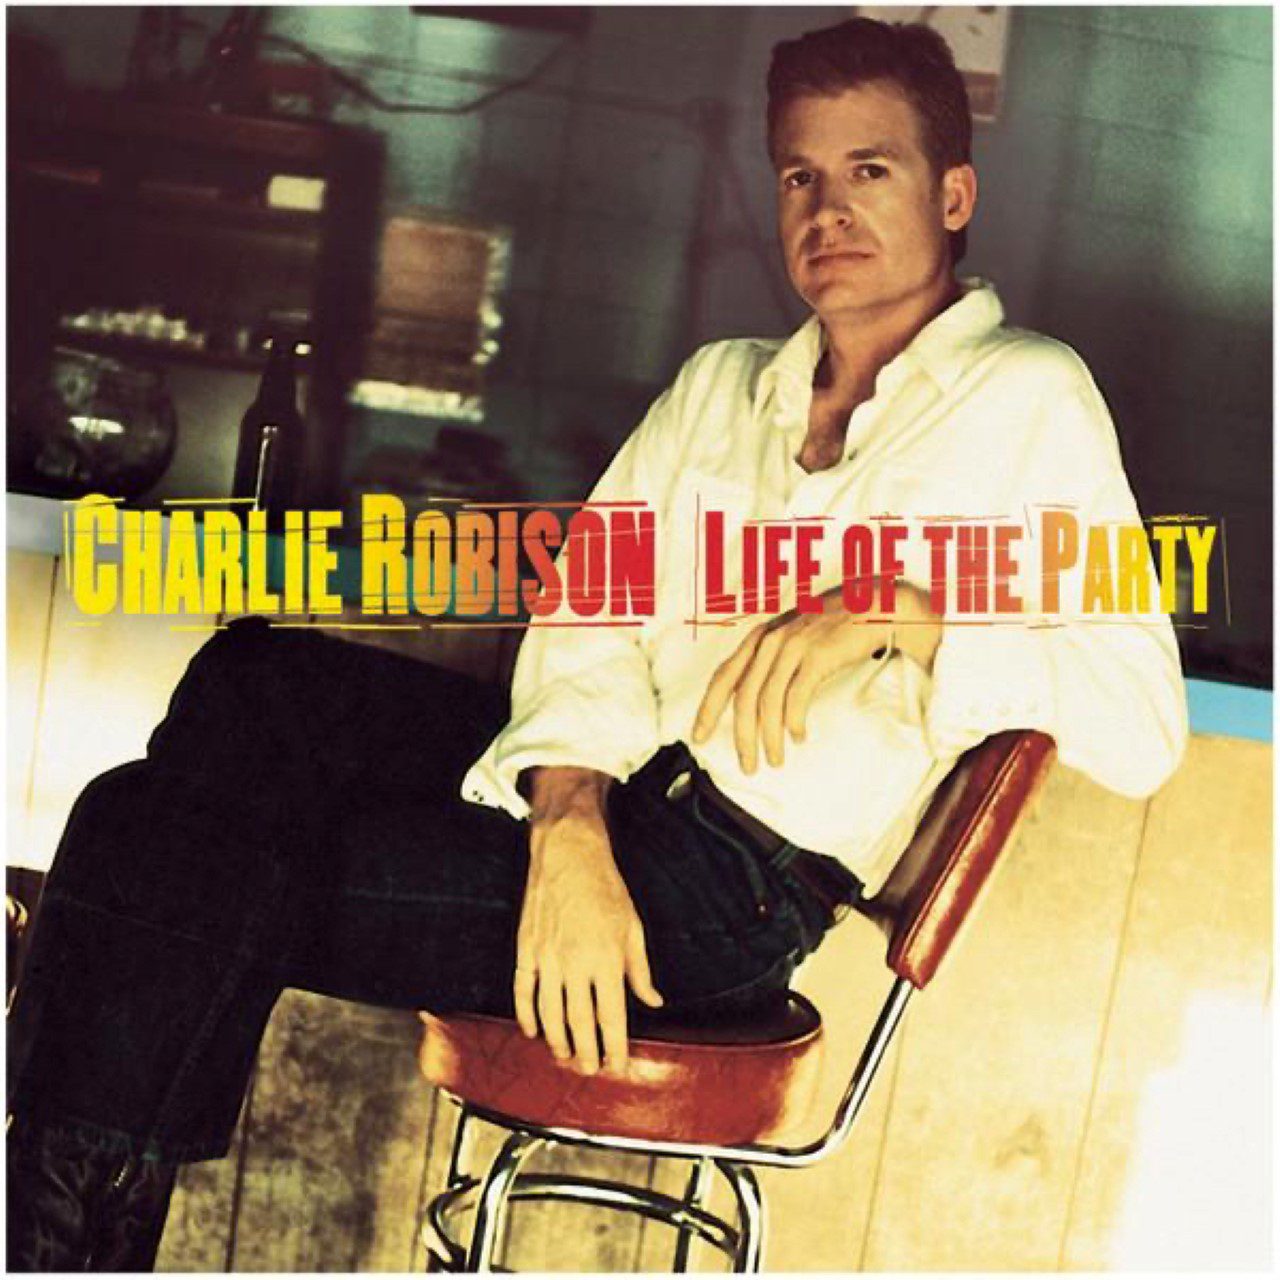 Charlie Robison - Life of the party cover album